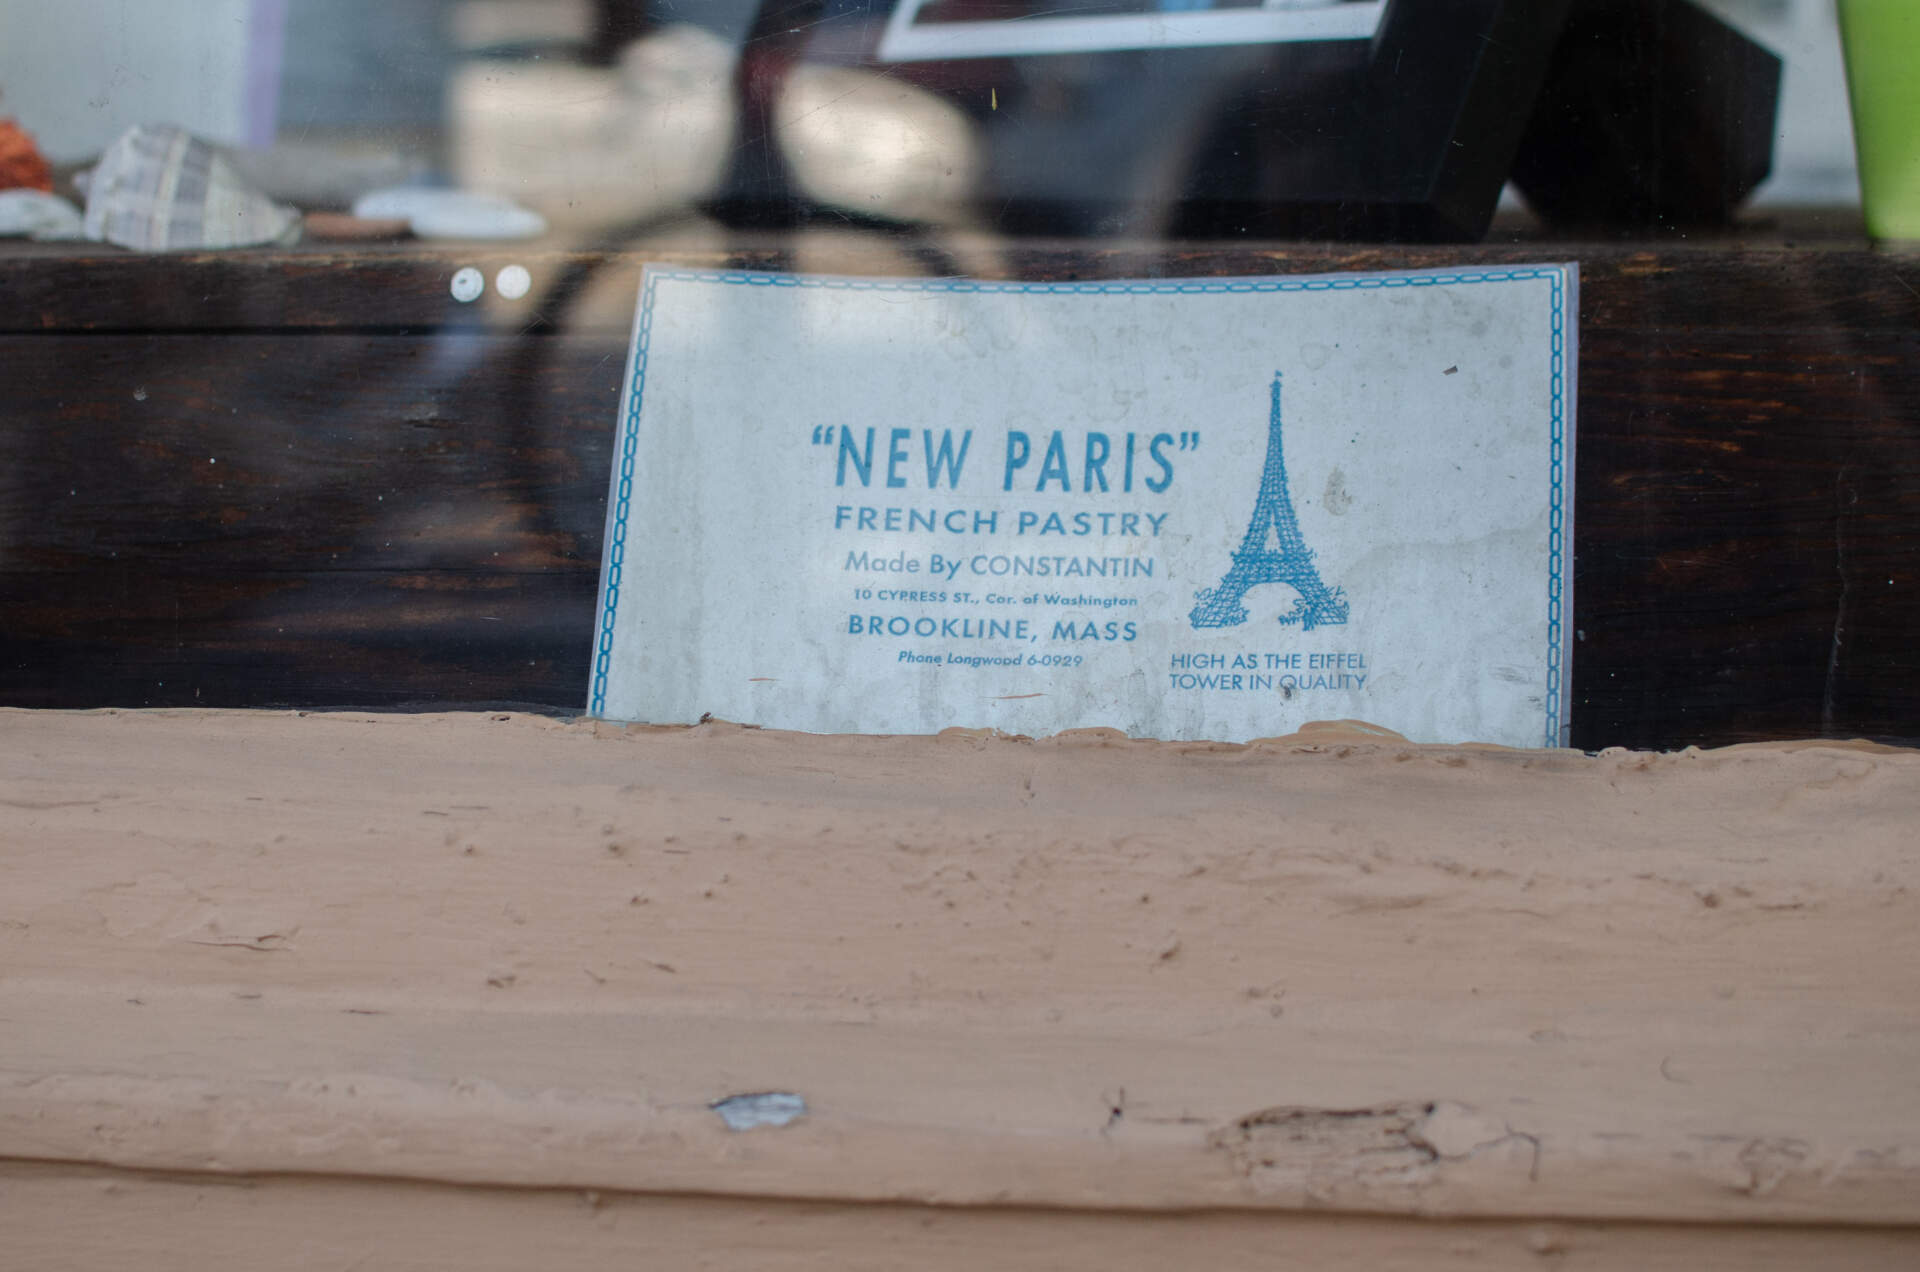 The New Paris Bakery window features a sign from years ago. (Sharon Brody/WBUR)